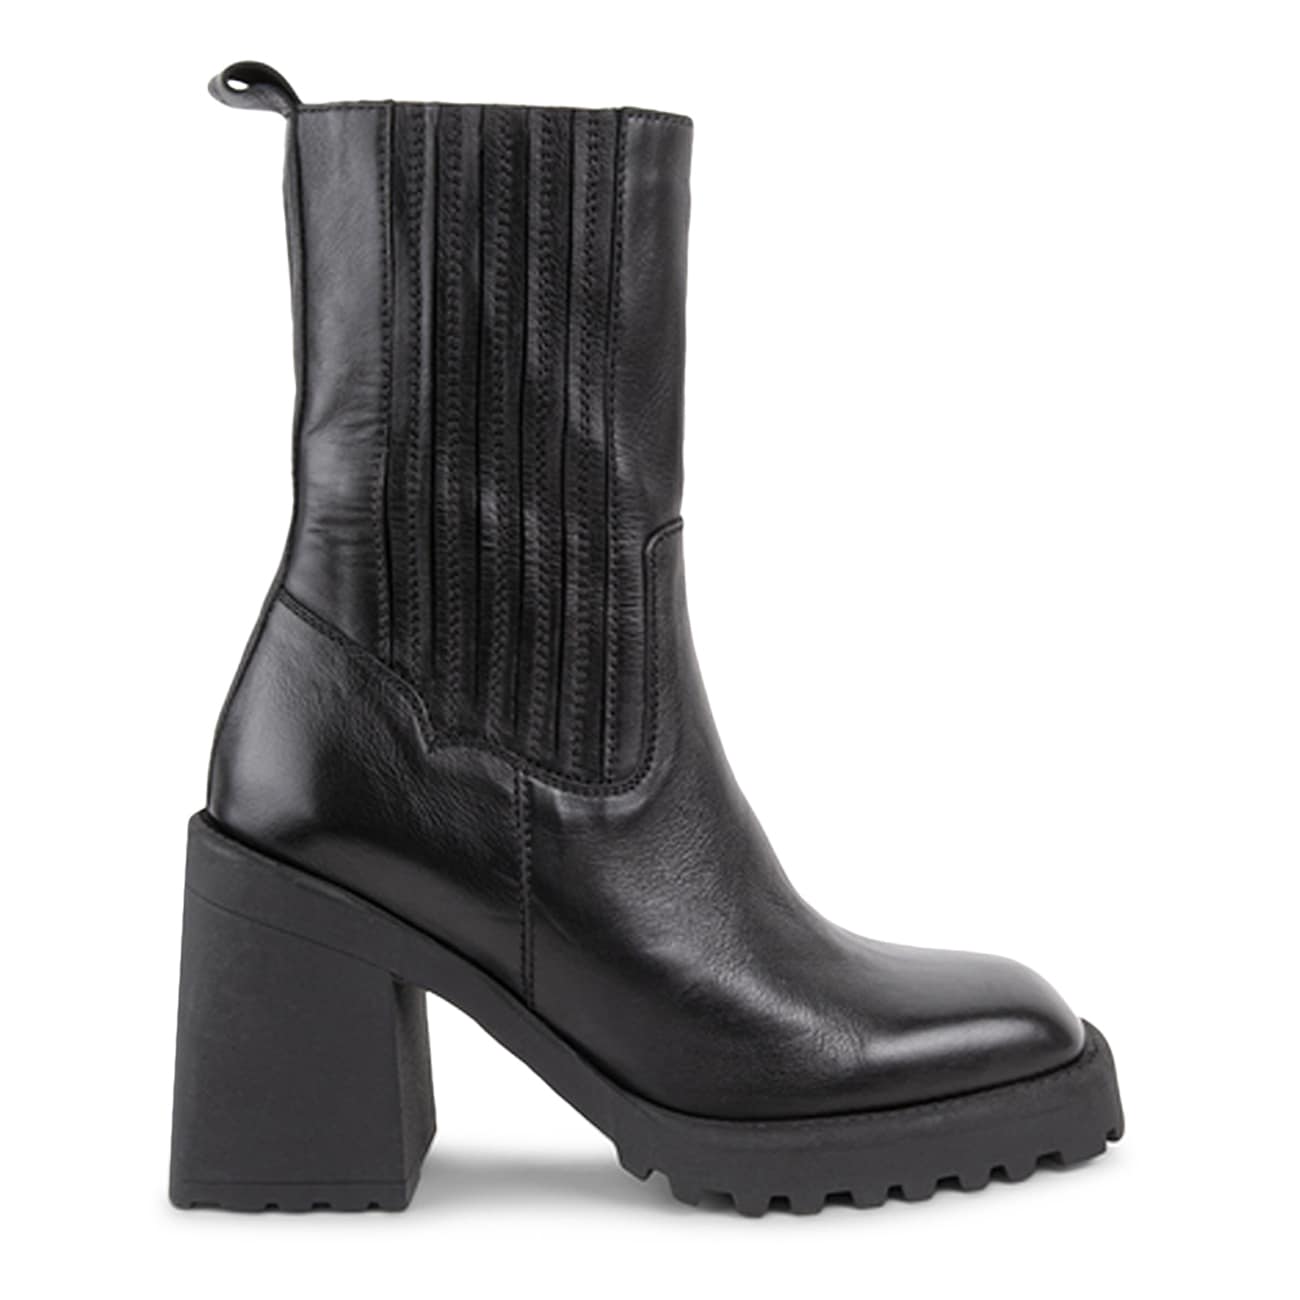 Steve Madden Gretyl Ankle Bootie | The Shoe Company